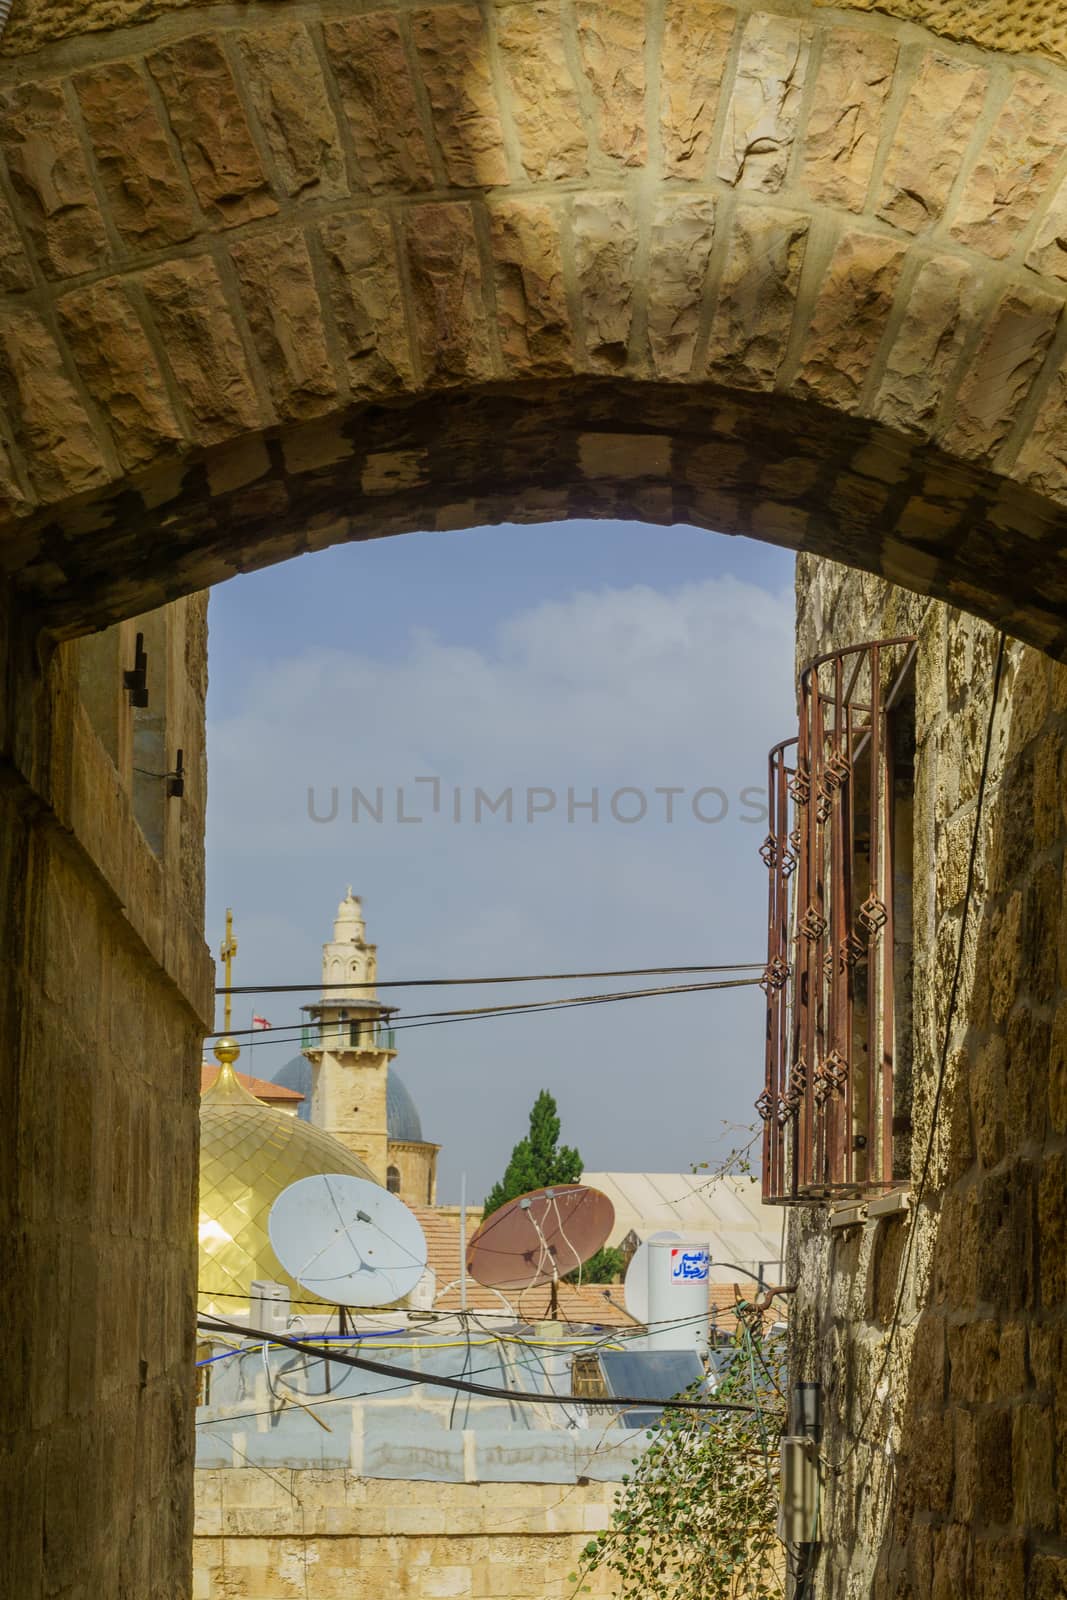 Jerusalem, Israel - October 19, 2018: Arches and roofs in the old city of Jerusalem, Israel